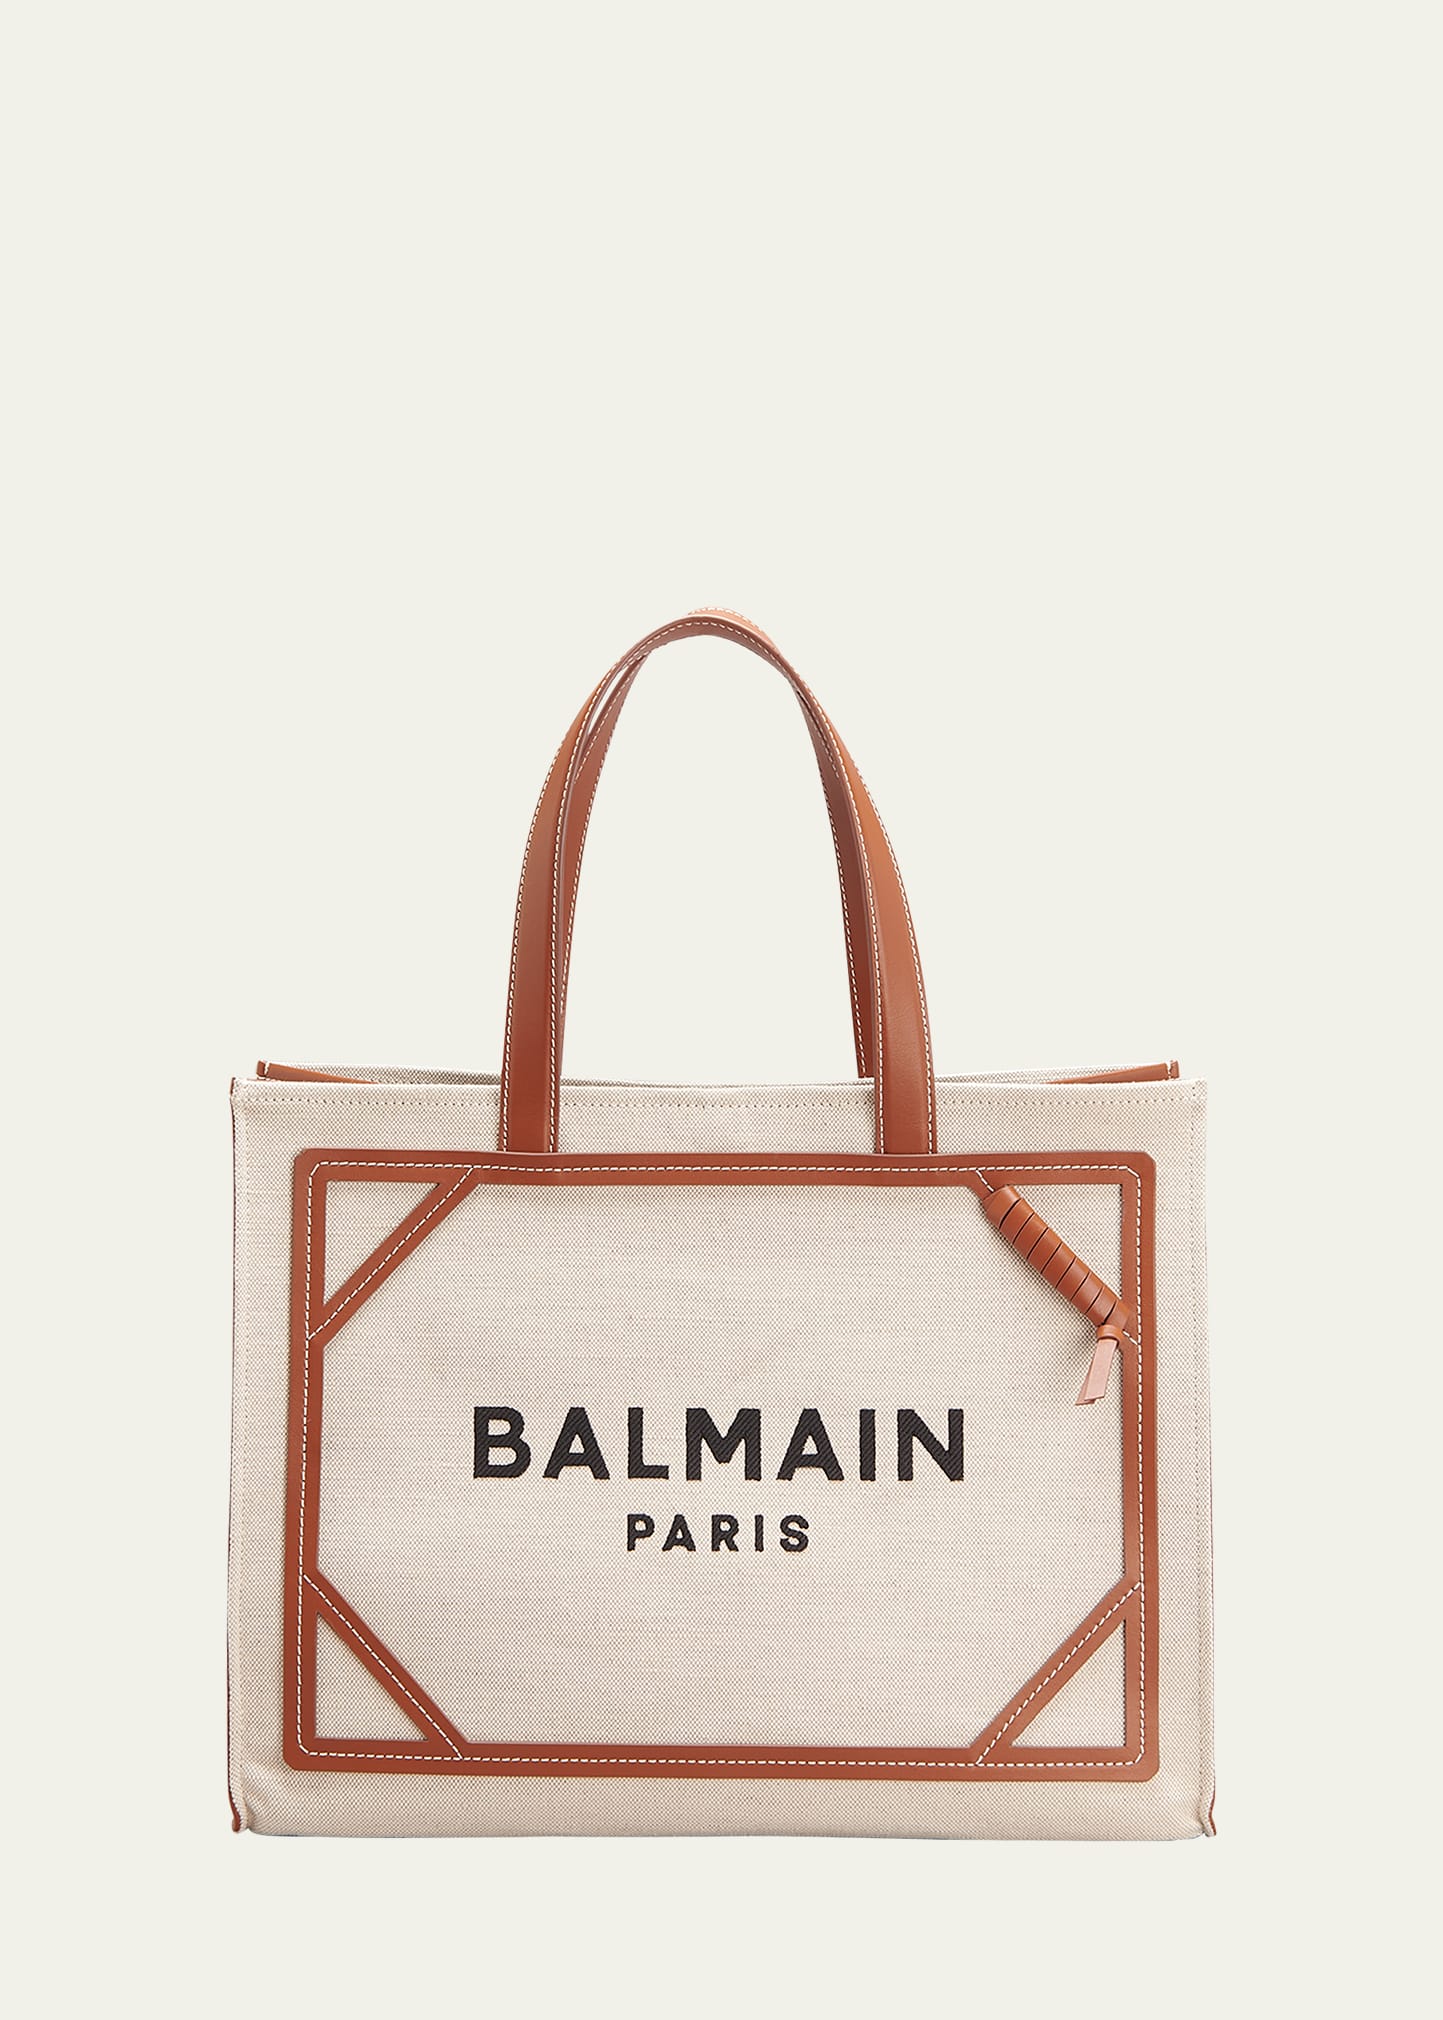 Balmain B Army Medium Shopper Tote Bag In Canvas With Leather Handles In Beige